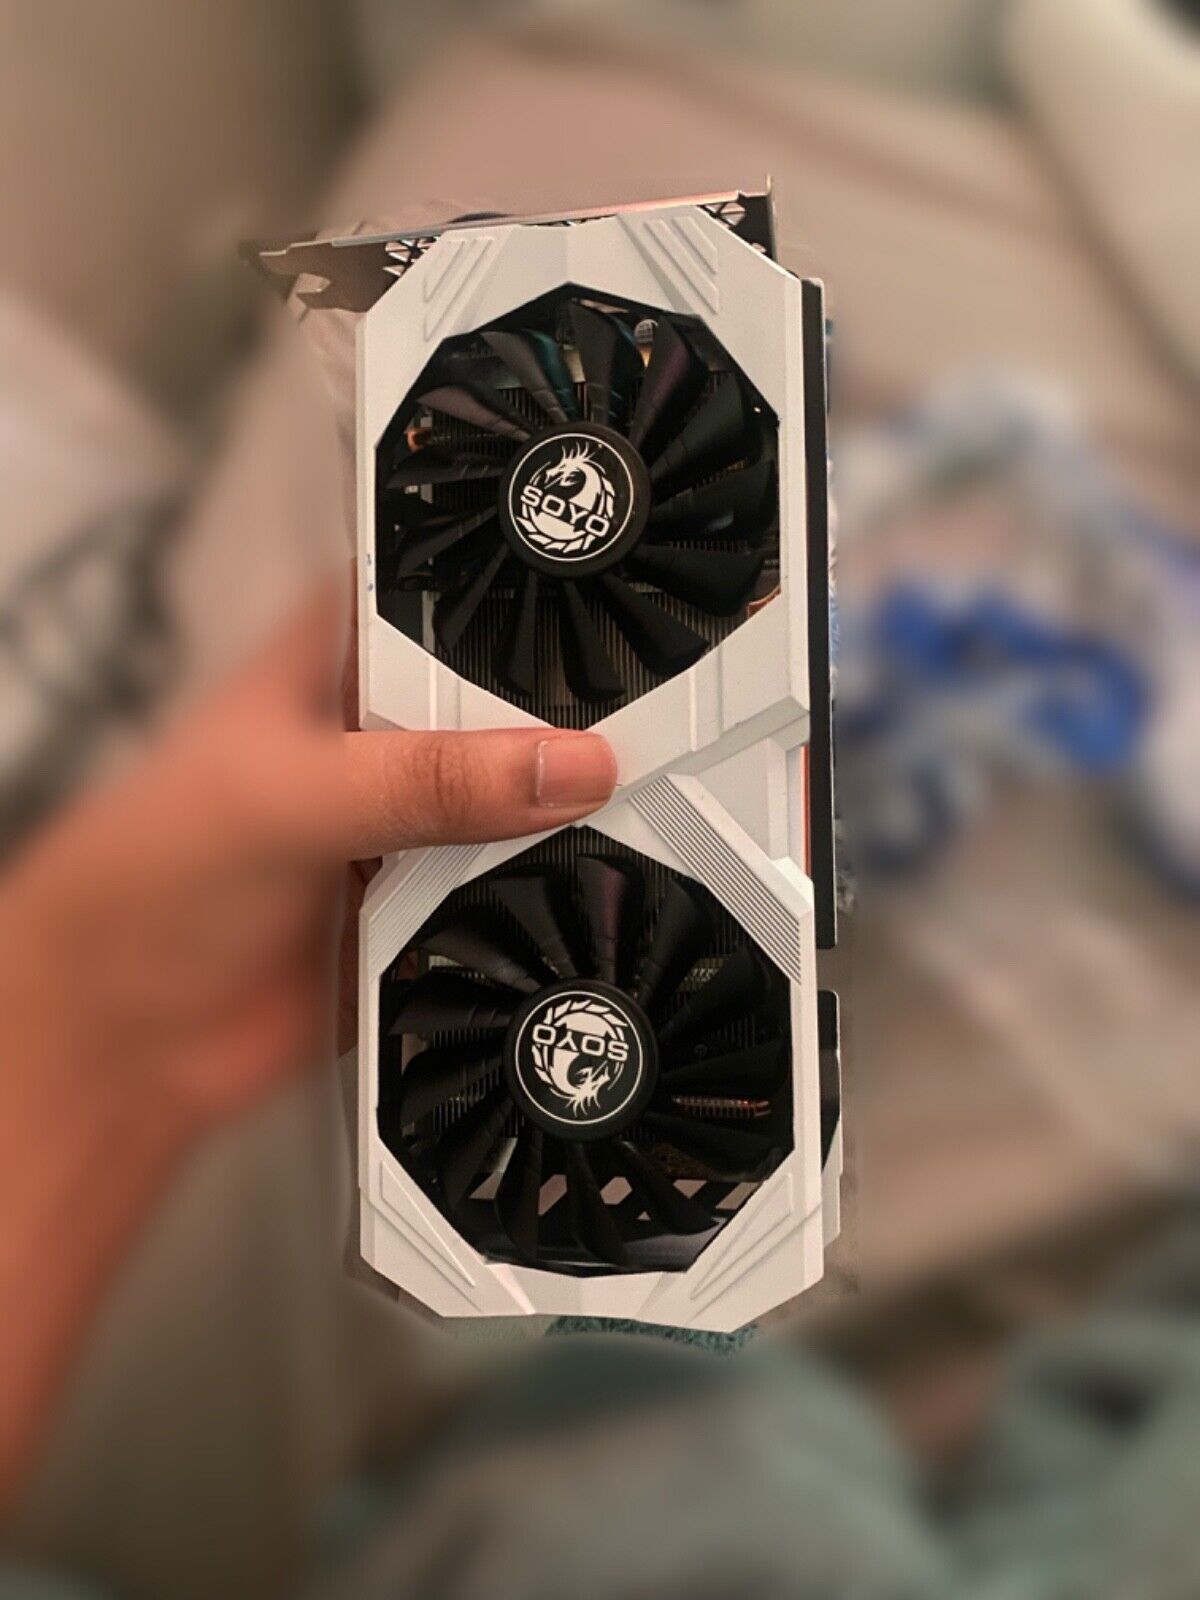 RTX 2060 super 8 GB white. Only 2 months old